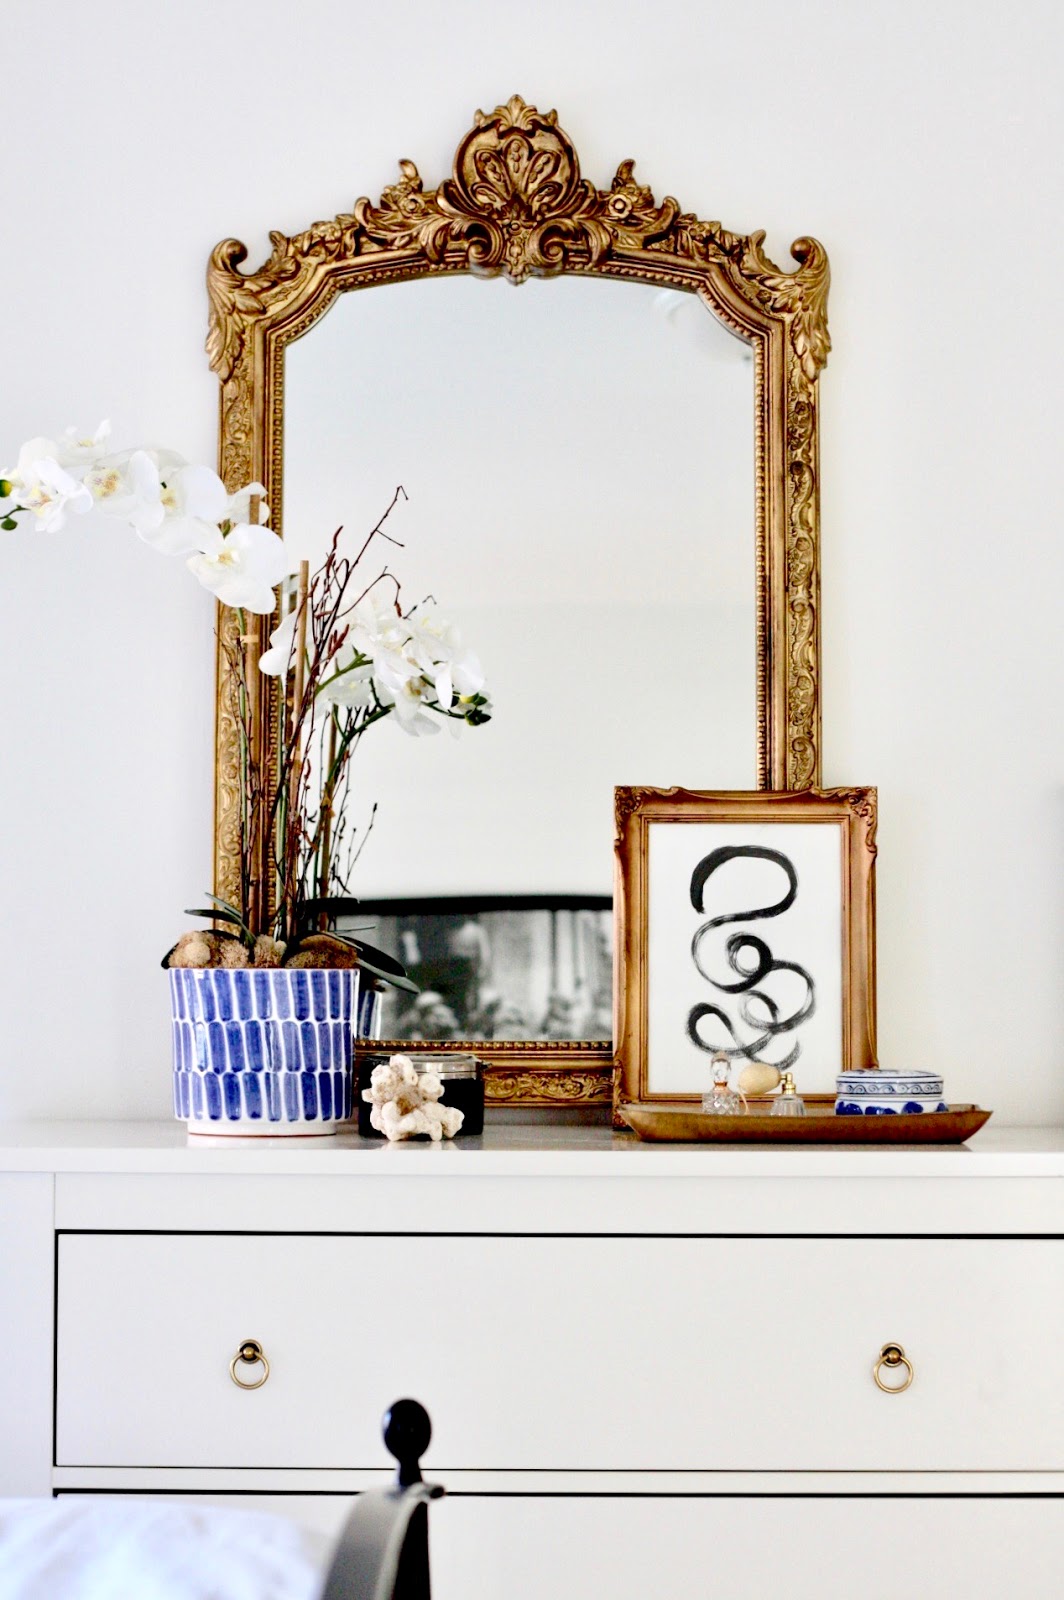 Age A Frame With Bright Gold Finish, How Do You Make A Gold Mirror Frame Look Antique